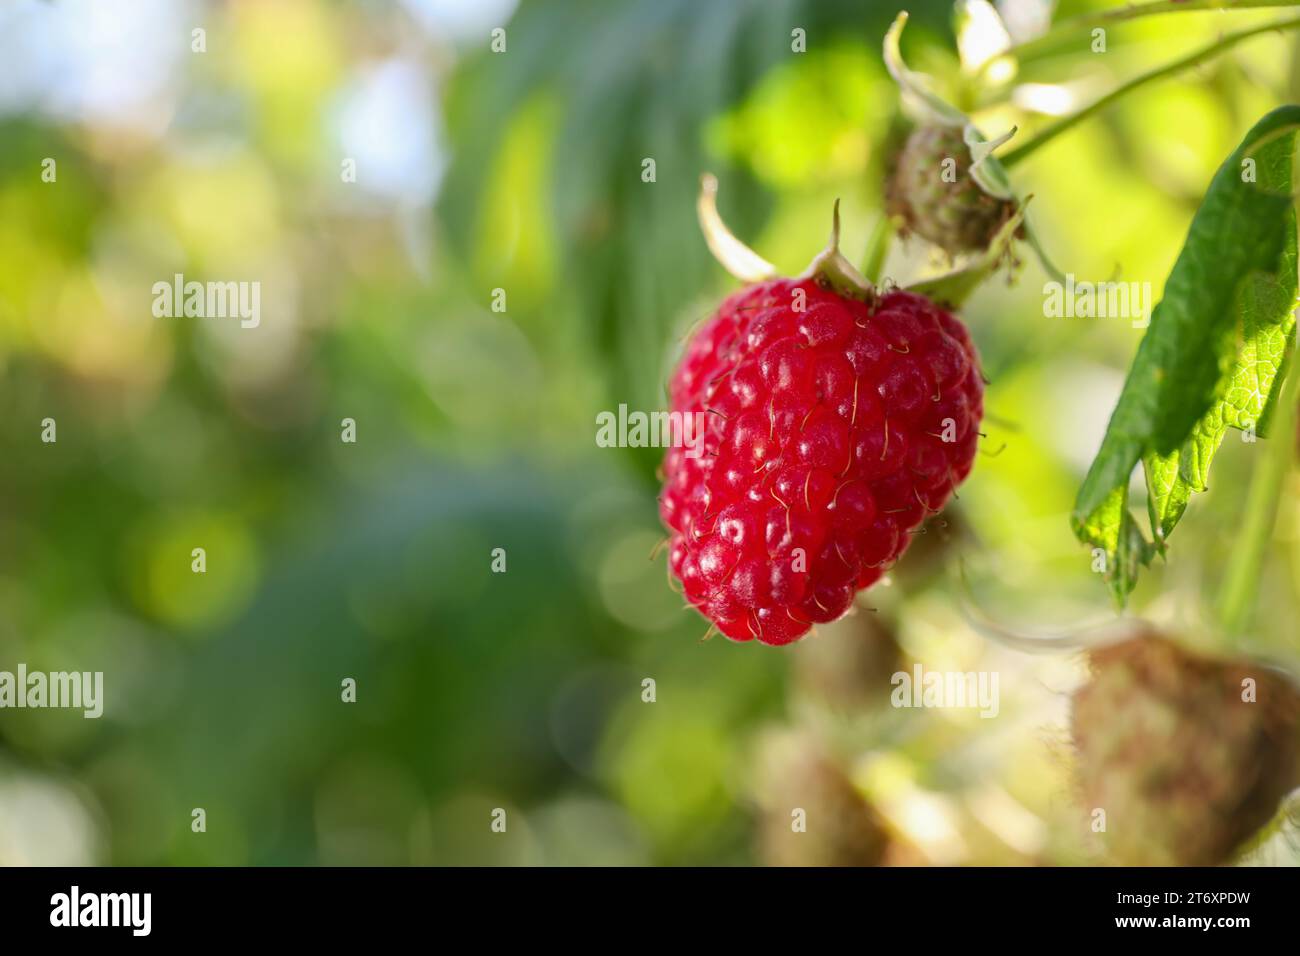 https://c8.alamy.com/comp/2T6XPDW/red-raspberry-growing-on-bush-outdoors-closeup-space-for-text-2T6XPDW.jpg